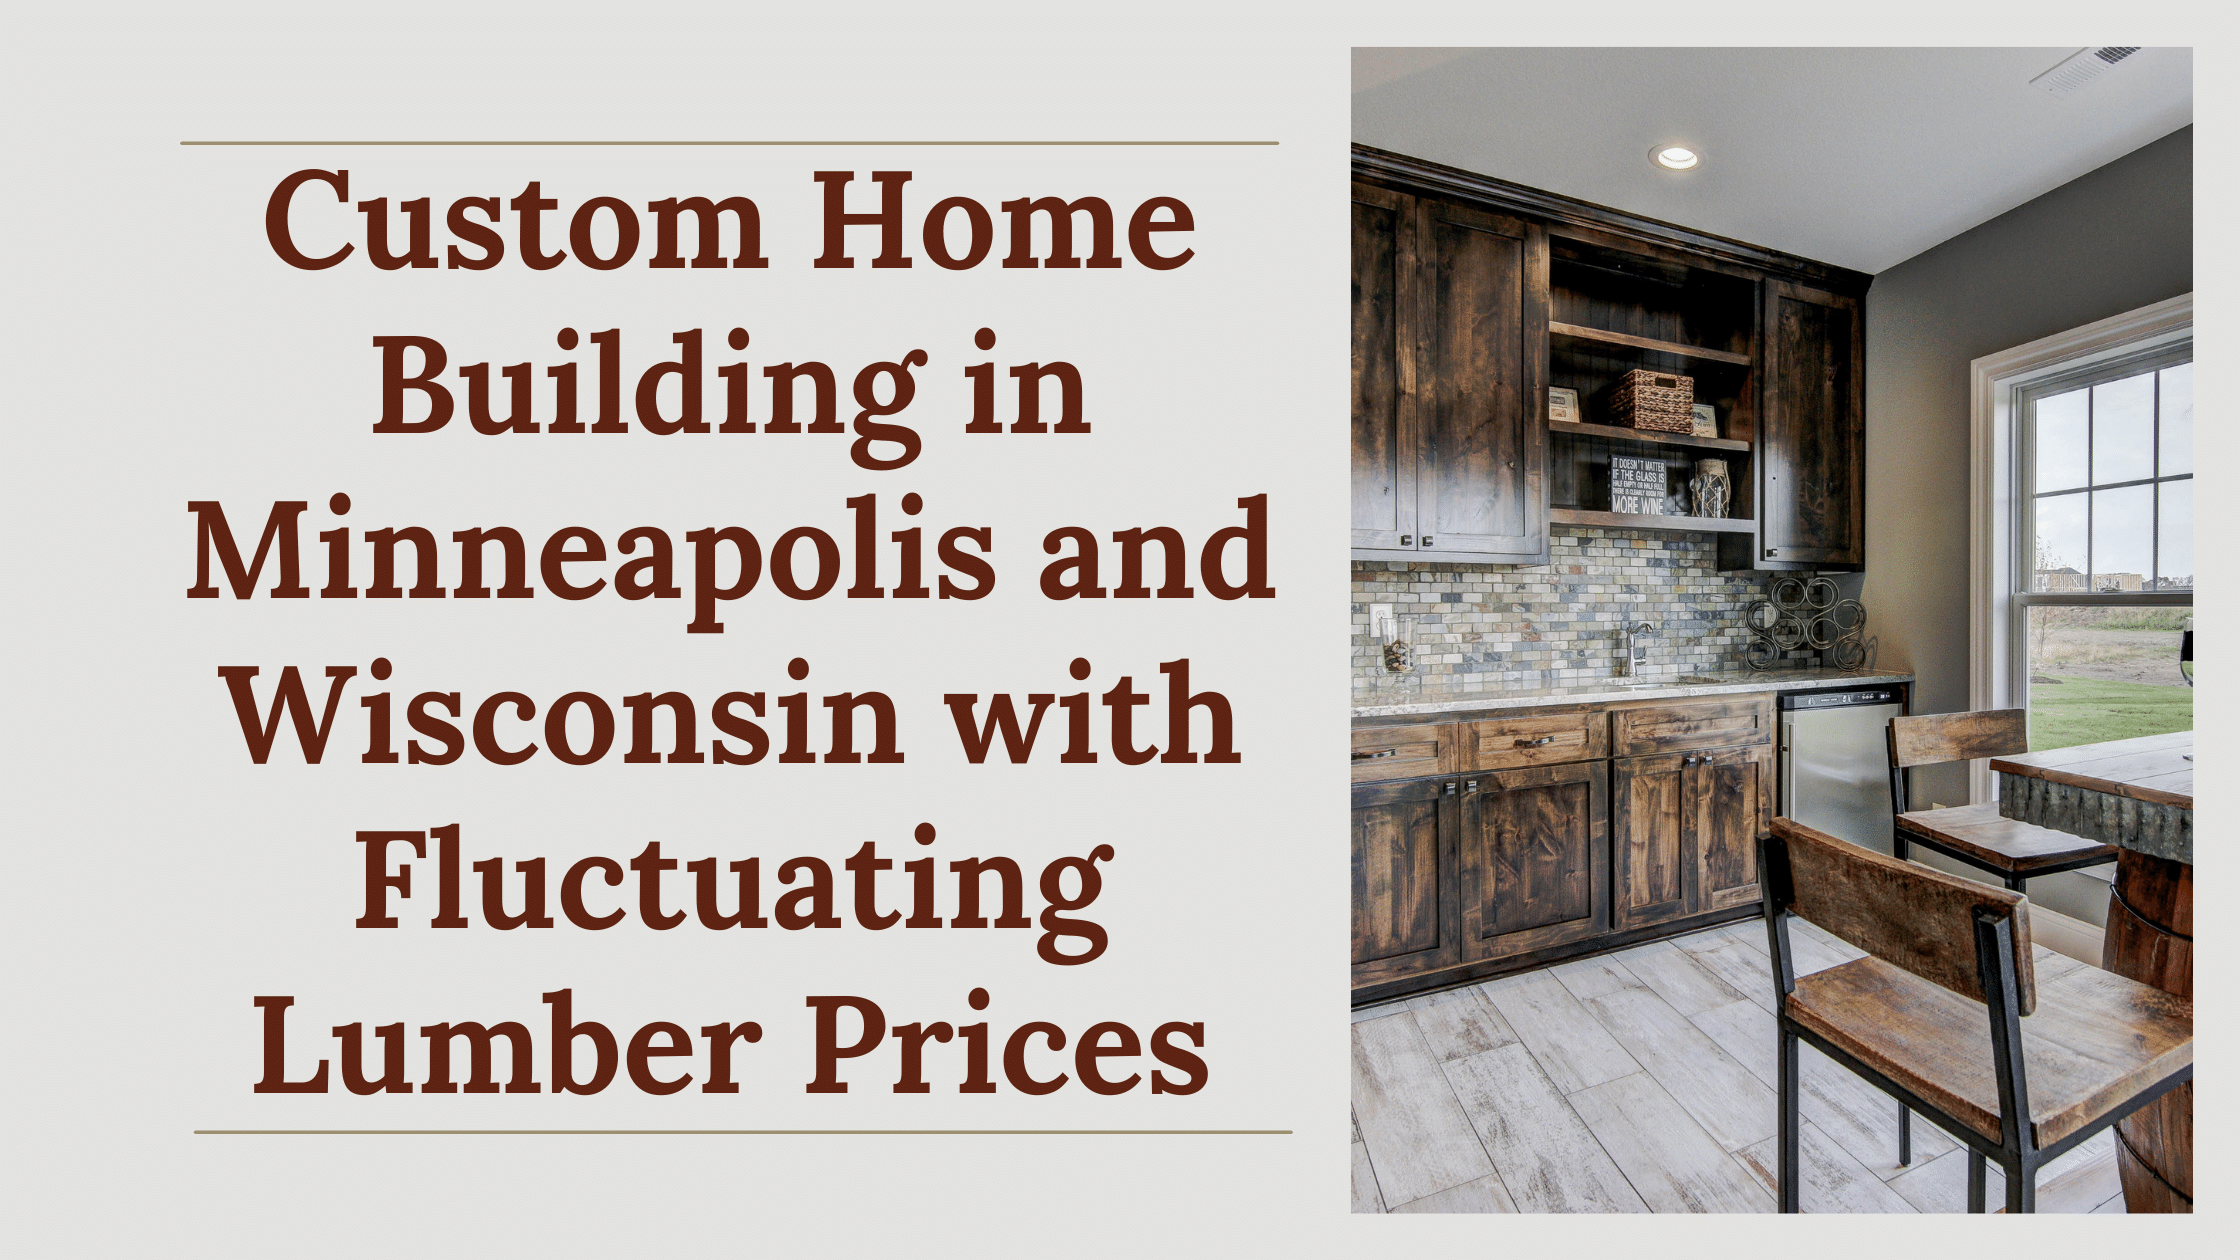 Custom Home Building in Minneapolis and Wisconsin with Fluctuating Lumber Prices